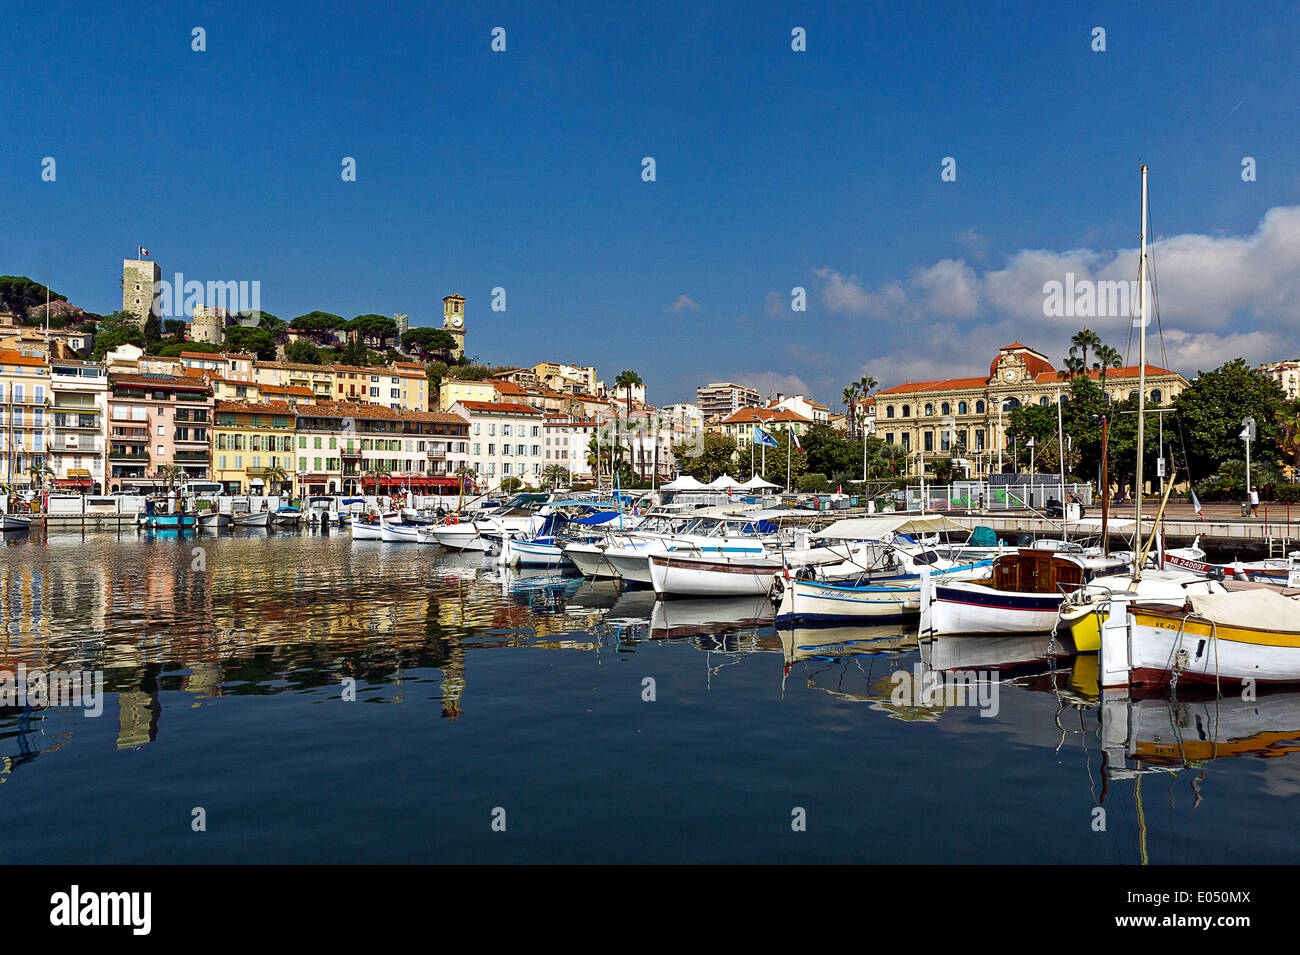 Europe, France, Alpes-Maritimes, Cannes. The old town and the old port. Stock Photo